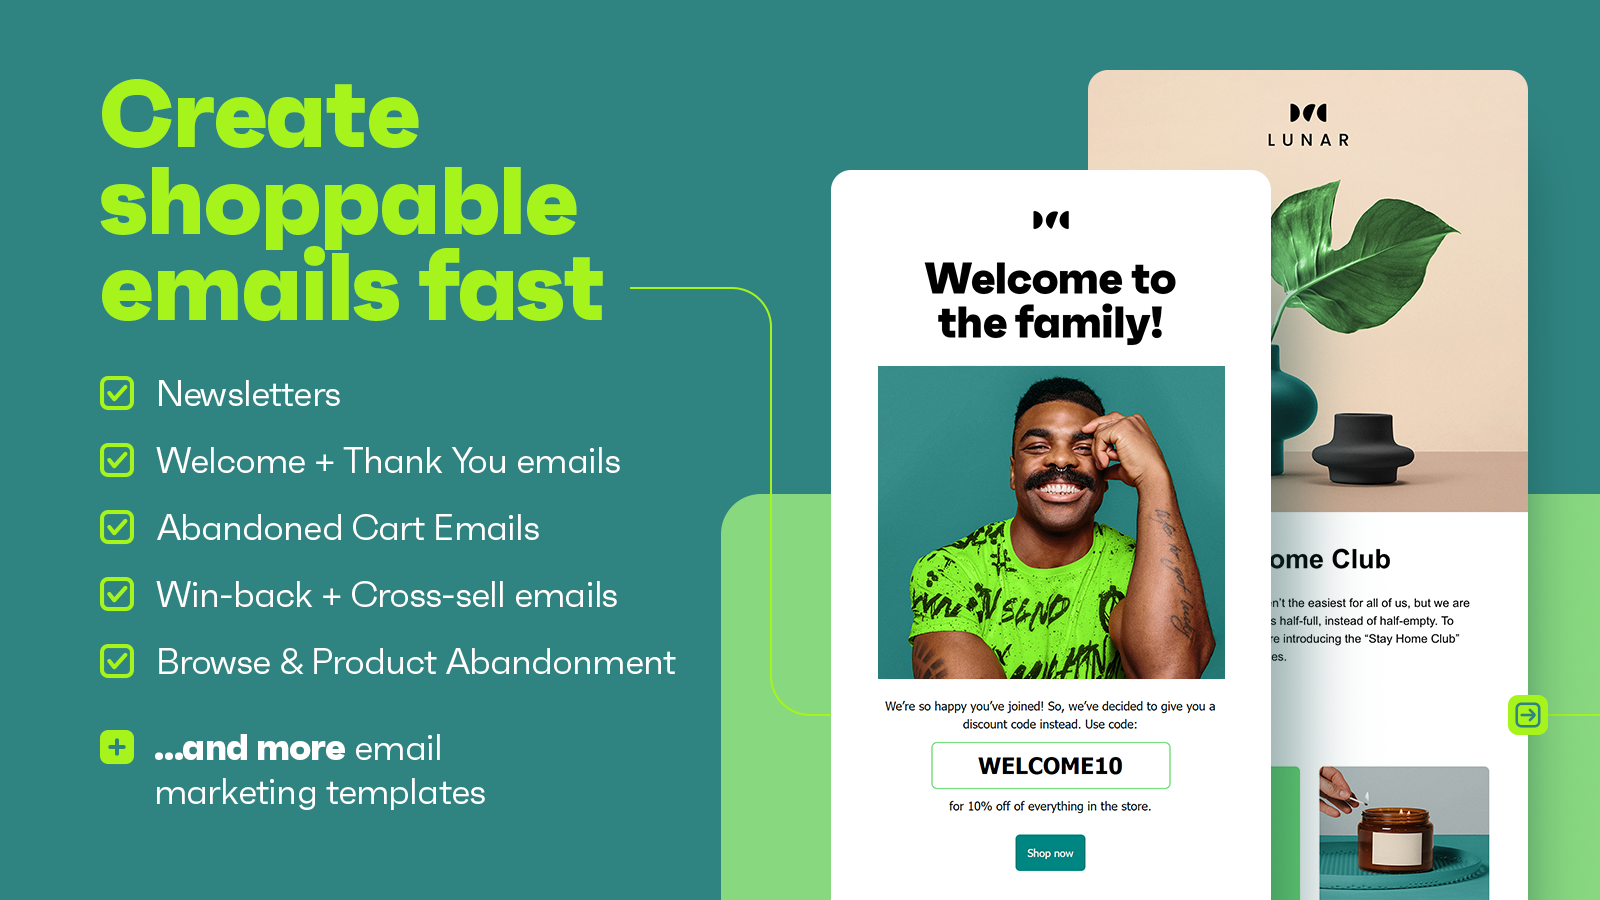 Create shoppable emails fast